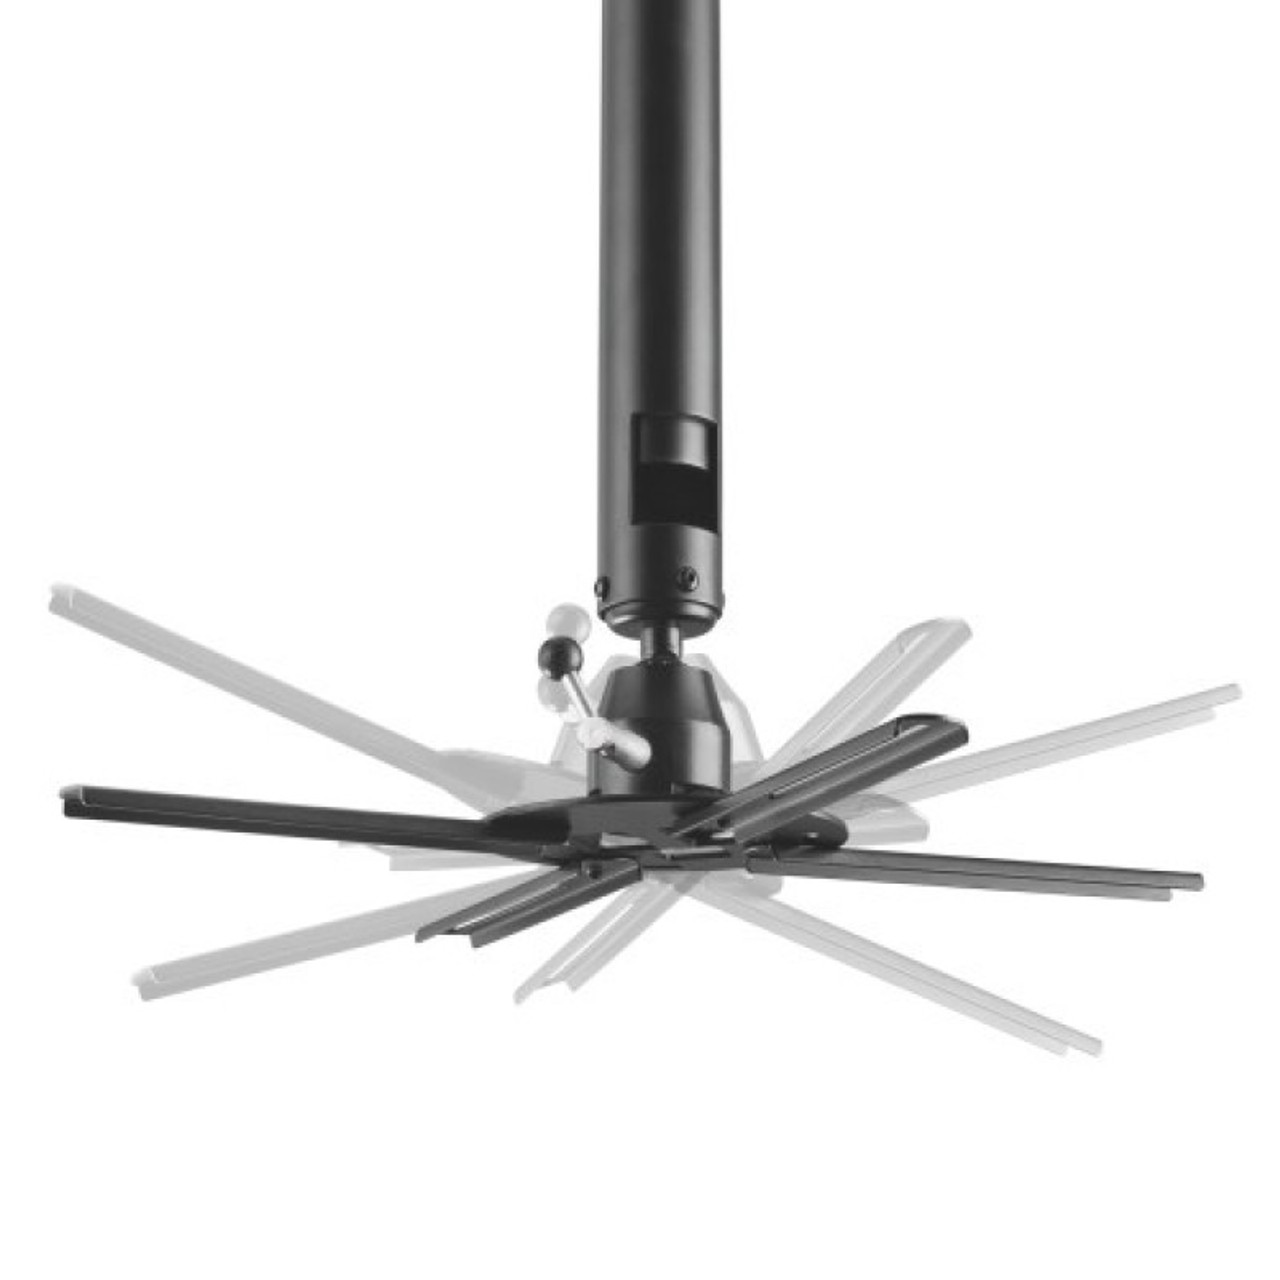 Quantum Sphere 670-900mm Height Adjustable Projector Ceiling Mount (30kg Max)